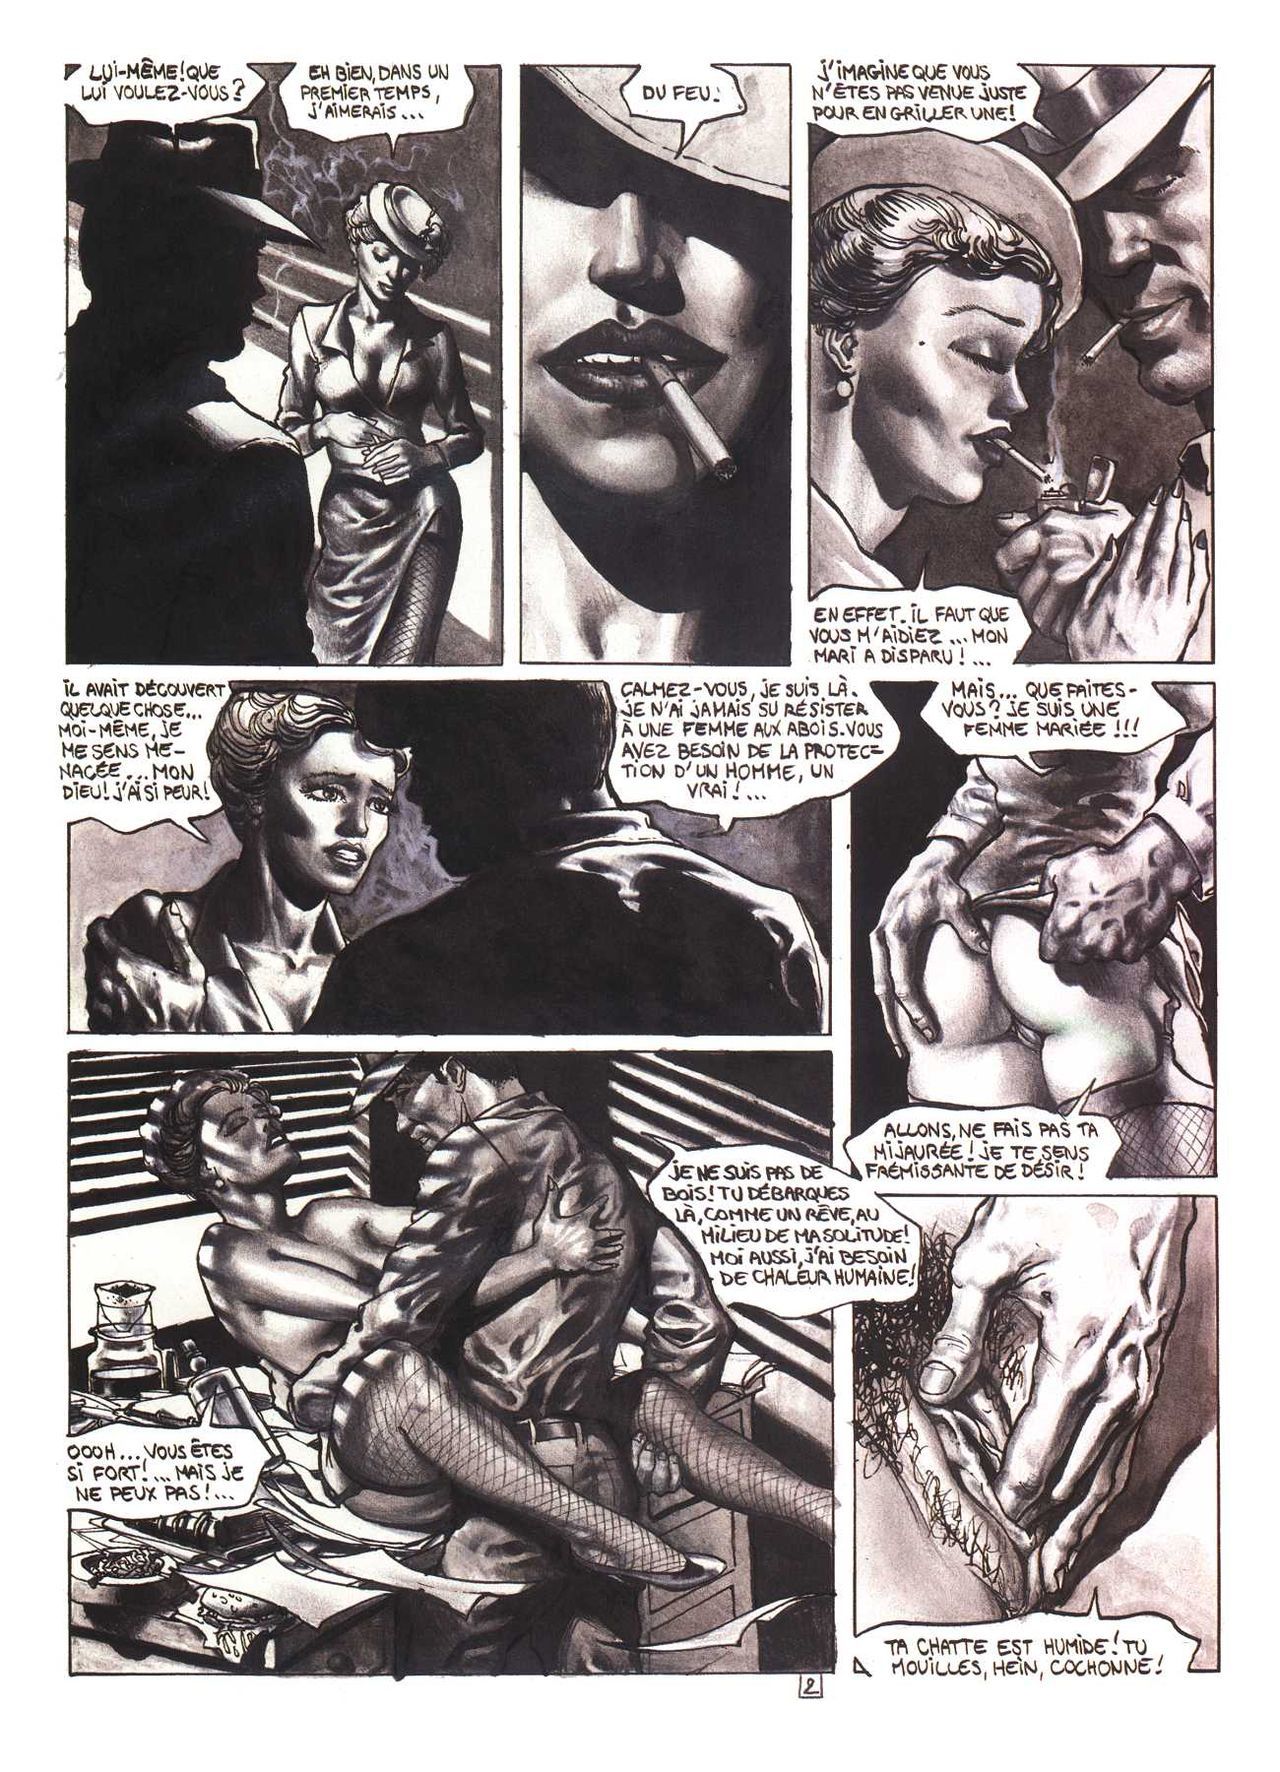 Mike Mercury by Starzo page 4